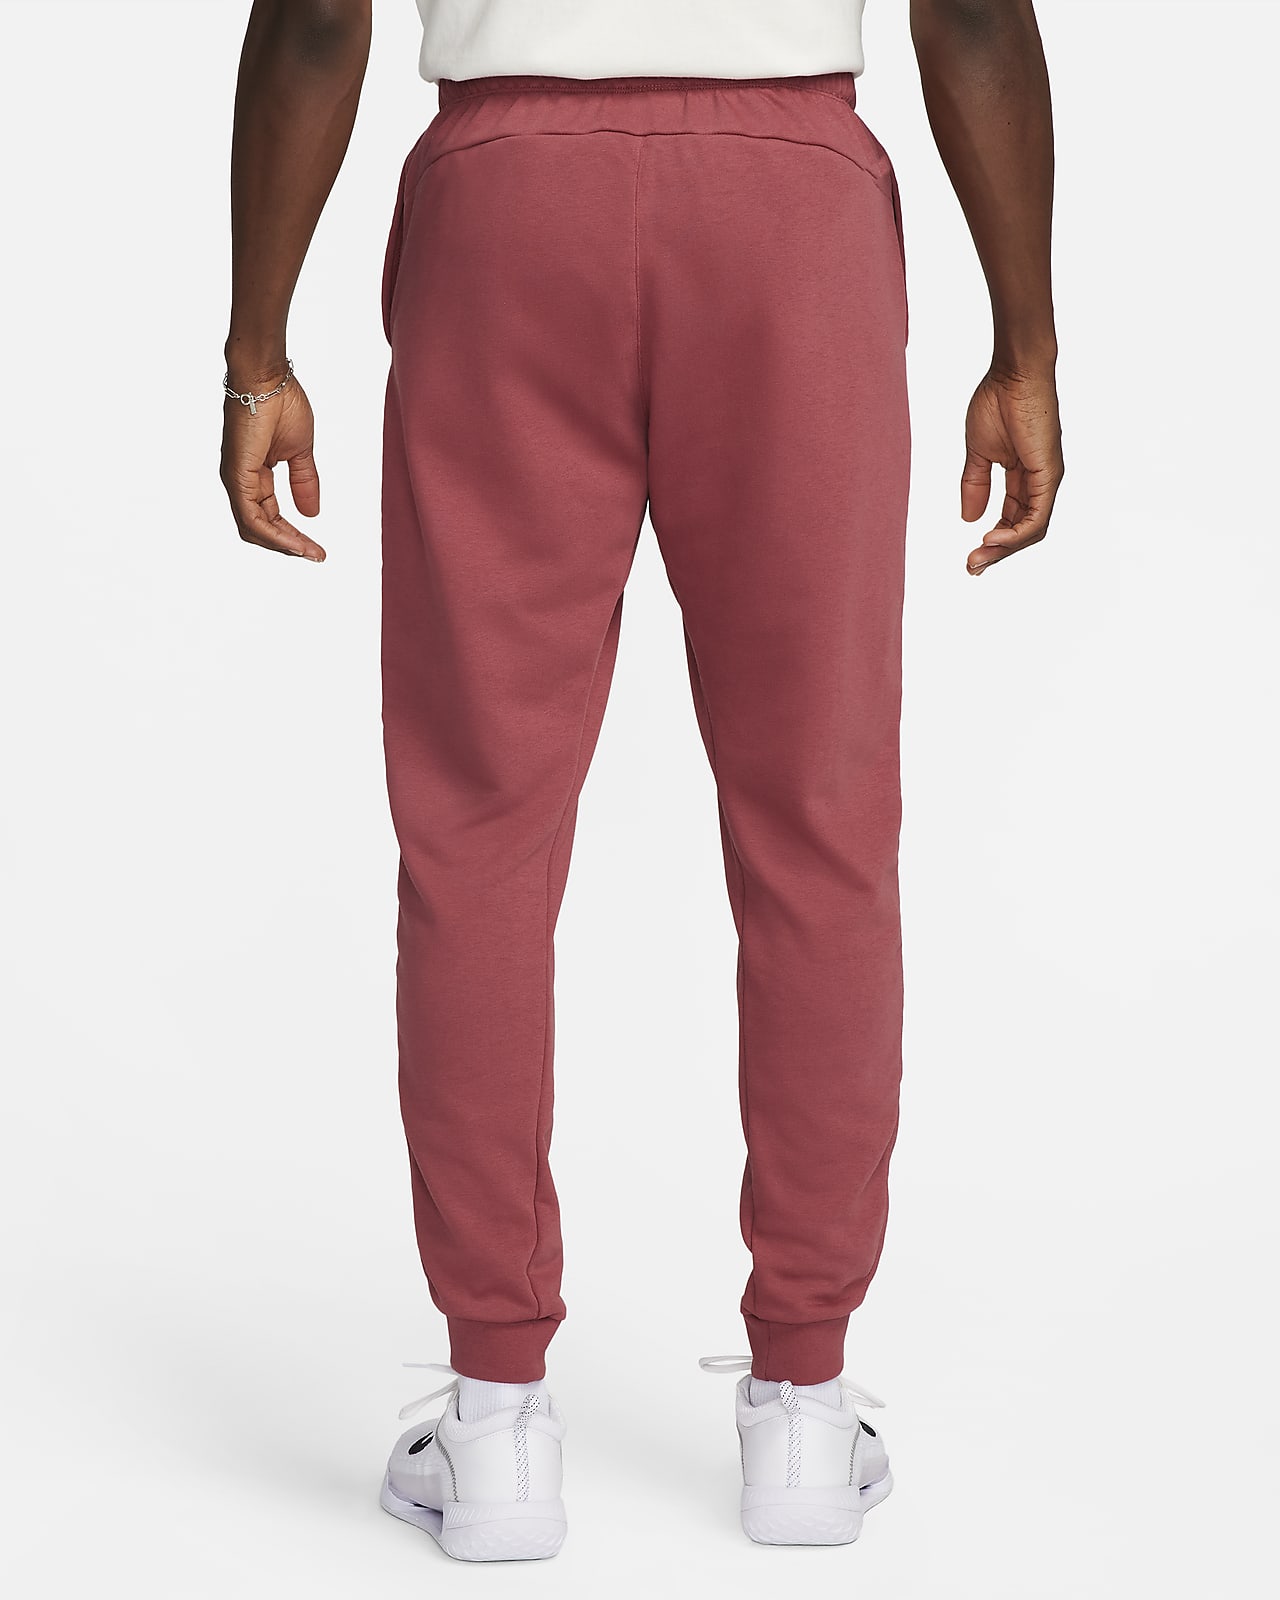 NikeCourt Heritage Men's French Terry Tennis Trousers. Nike AT